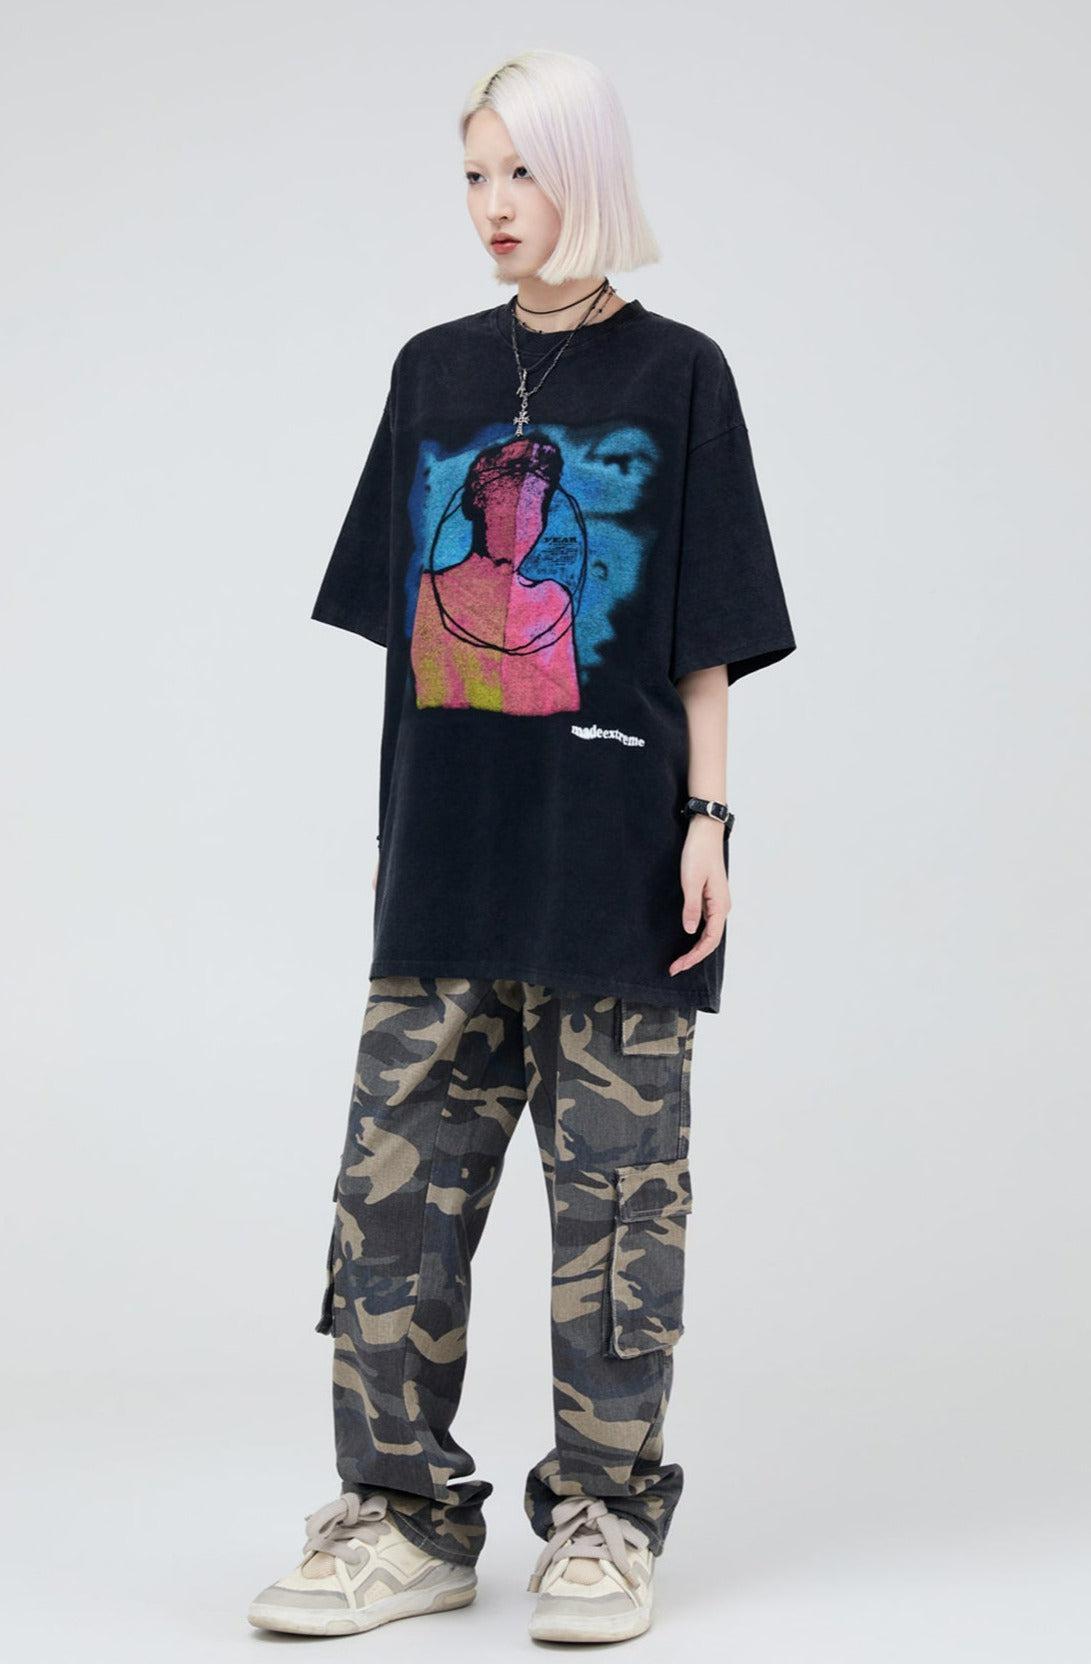 Creative Portrait Graphic T-Shirt Korean Street Fashion T-Shirt By Made Extreme Shop Online at OH Vault